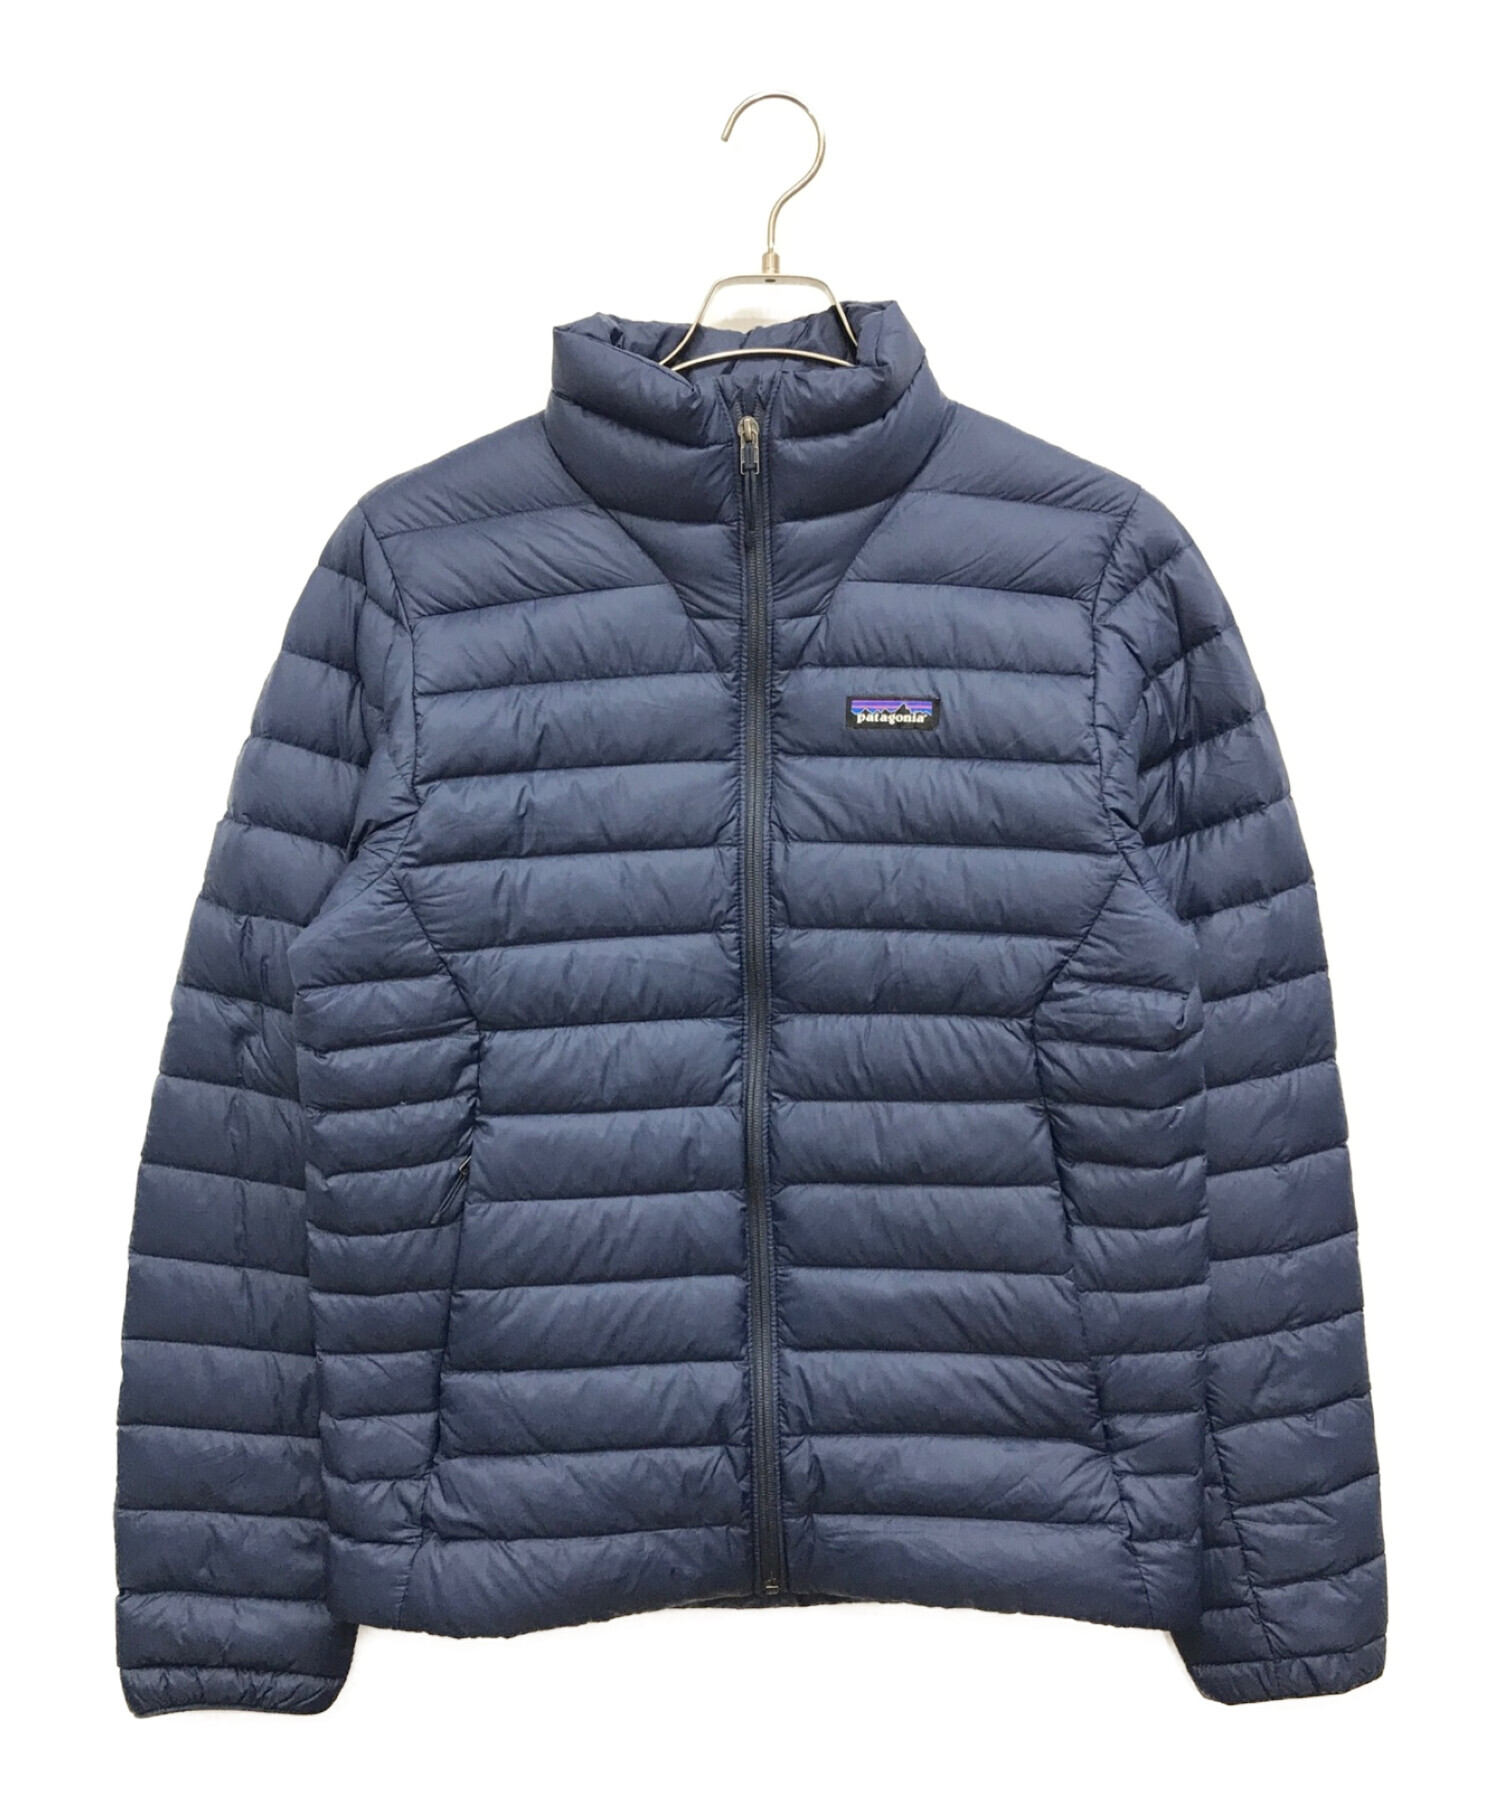 Patagonia ダウンセーター 2011年製 レア size S-